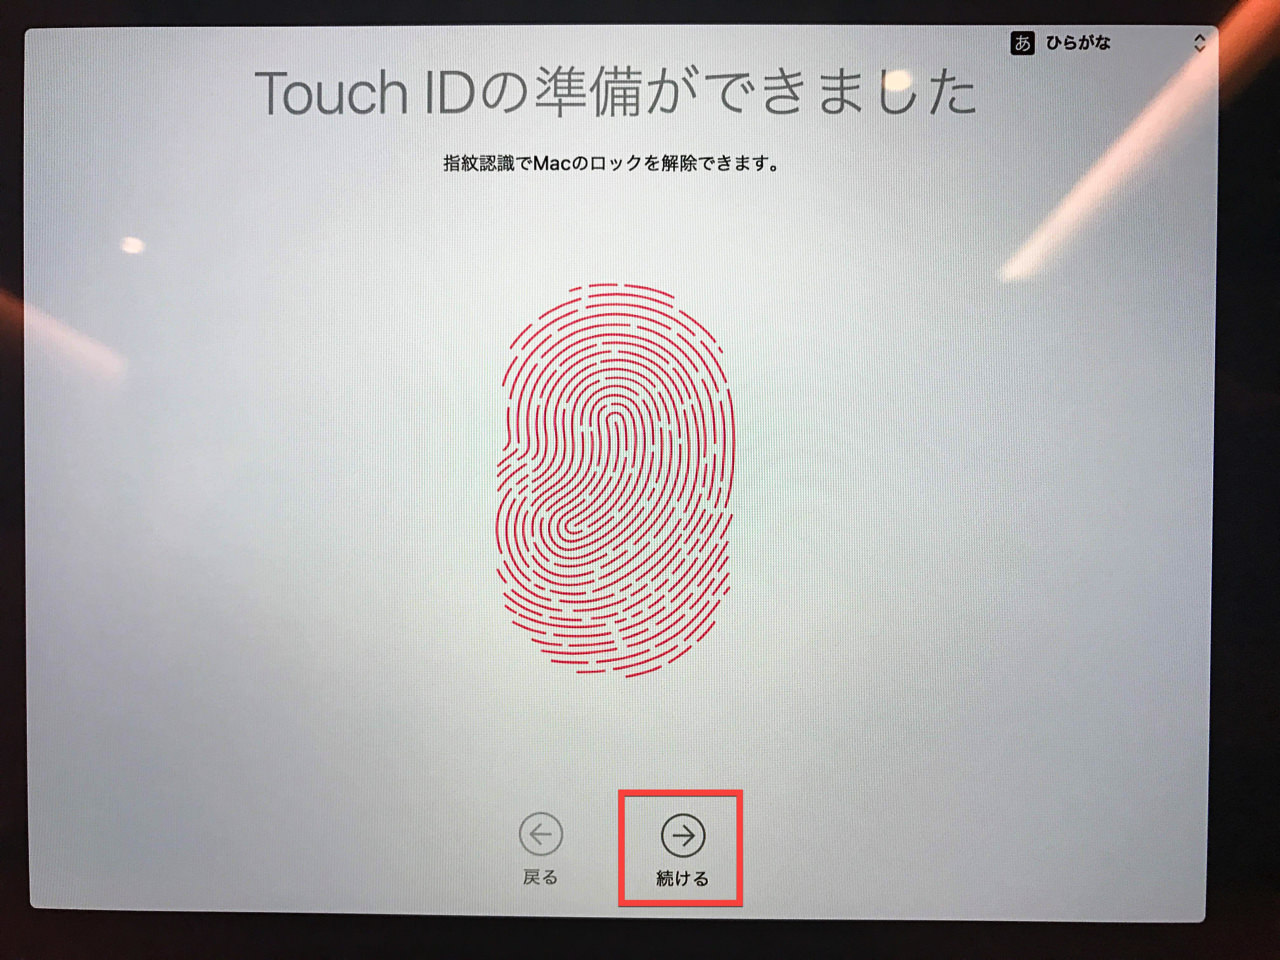 「Touch ID」部分に指を当てて離す